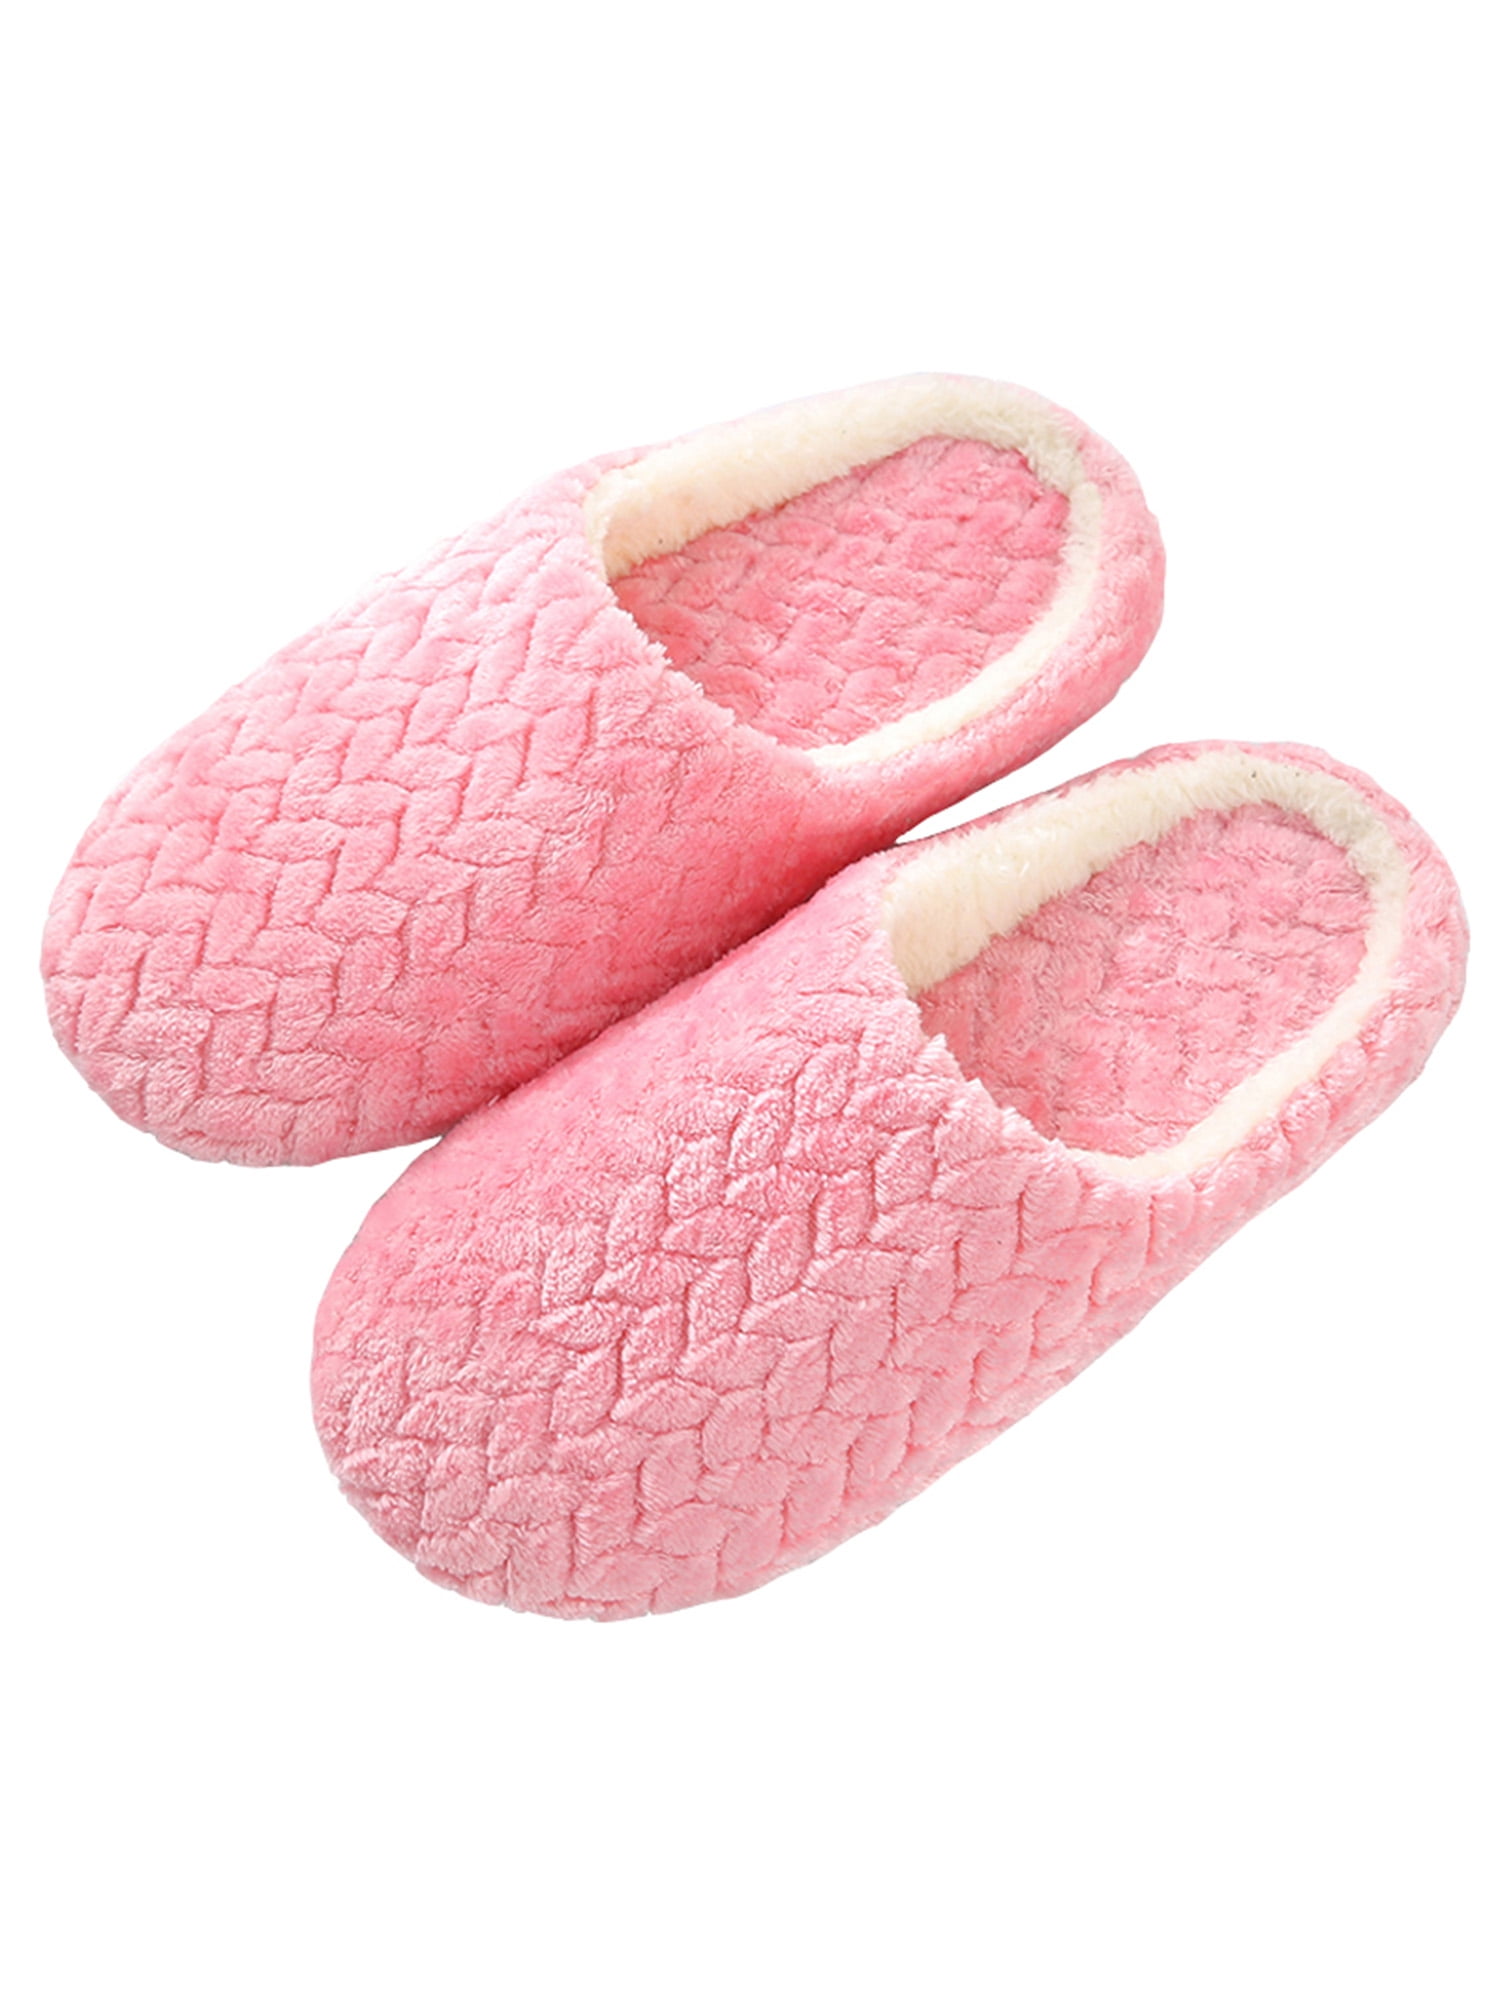 NEW Womens PINK Anti-Slip Warm Comfy Indoor Home Plush Slippers Shoes Size 9-10 